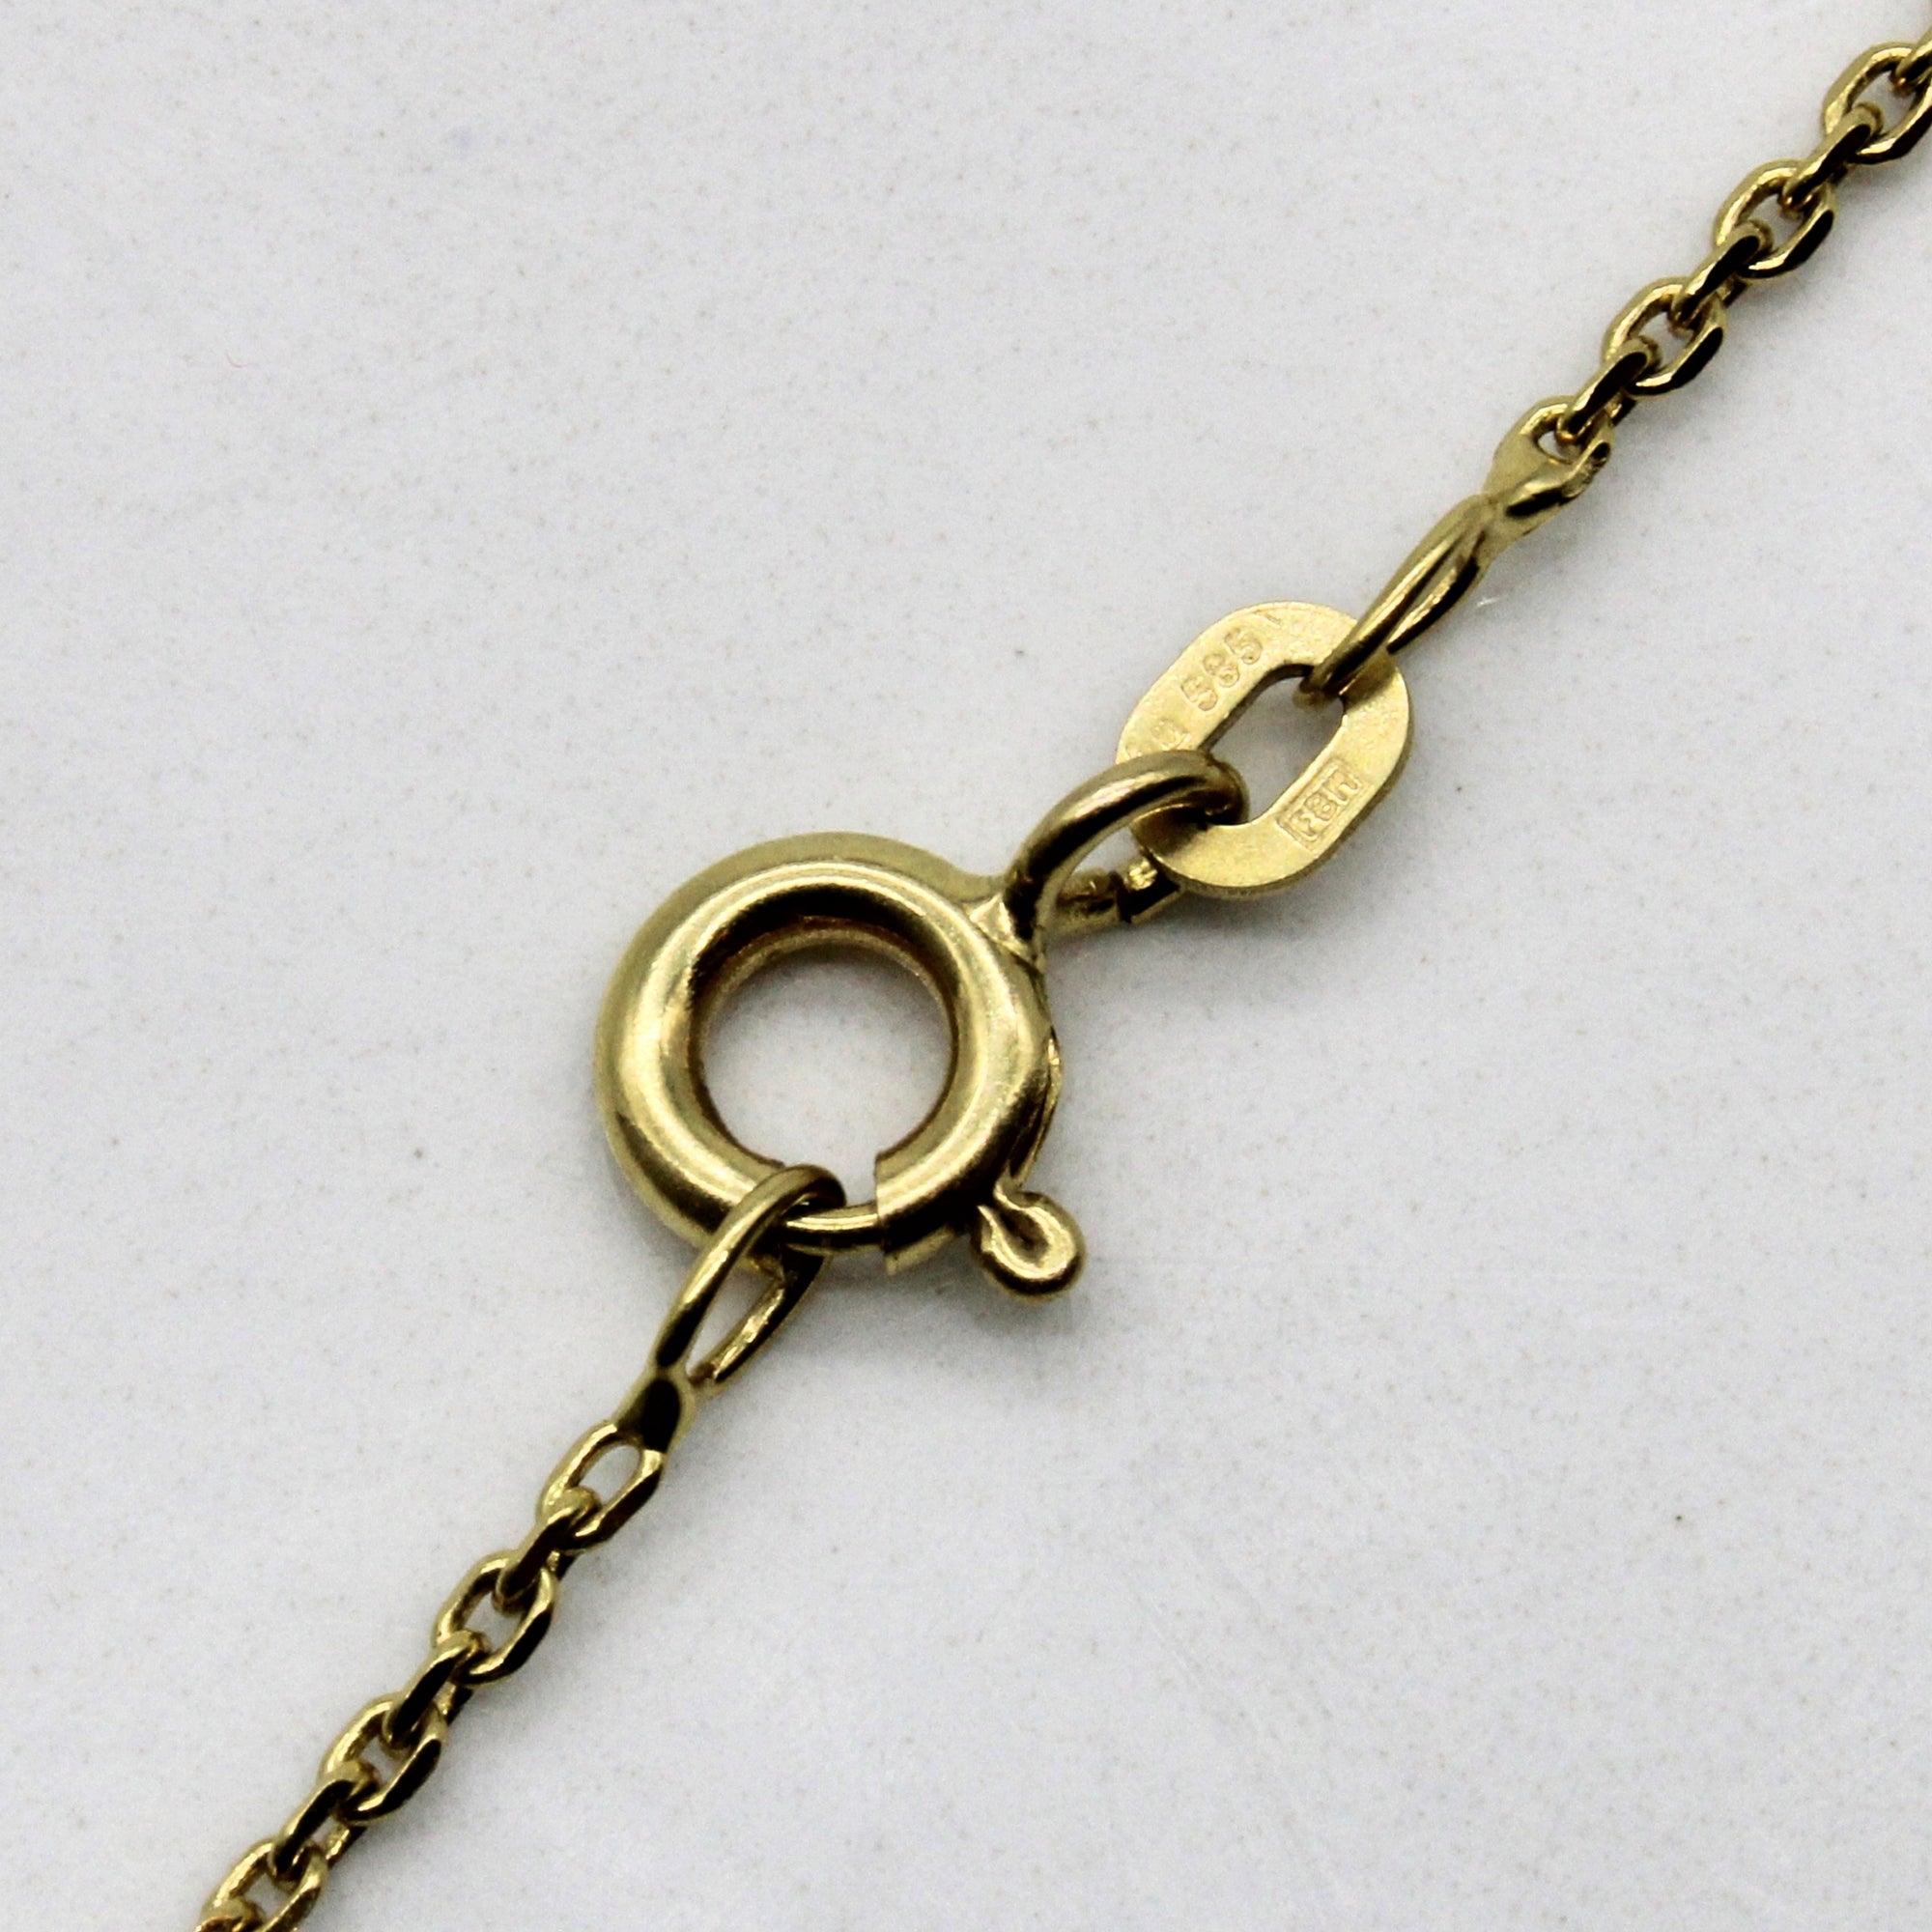 14k Yellow Gold Beveled Rolo Chain | 20